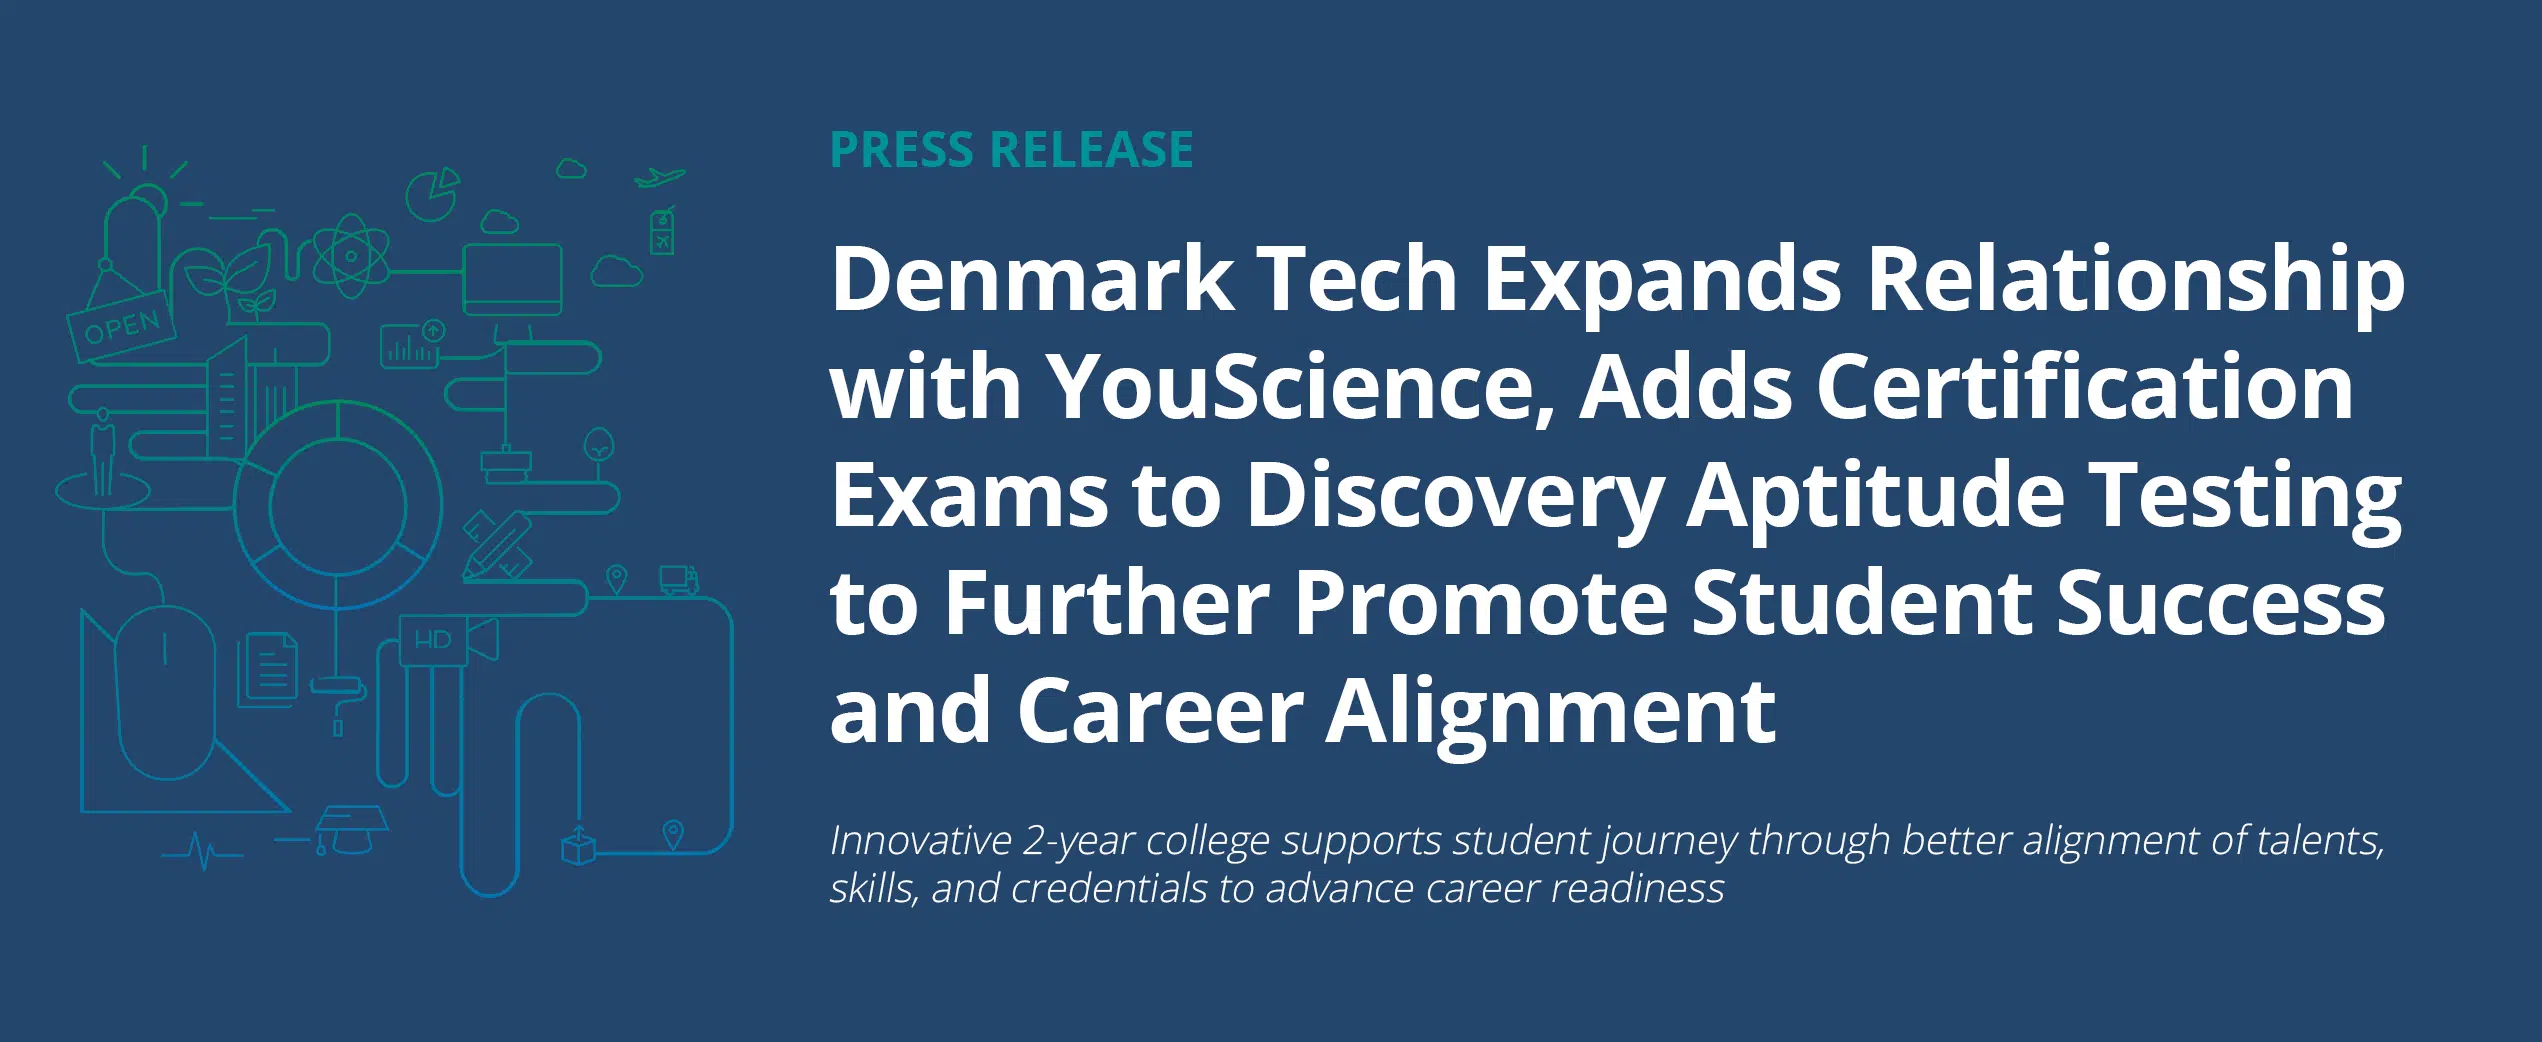 Denmark Tech Expands Relationship with YouScience, Adds Certification Exams to Discovery Aptitude Testing to Further Promote Student Success and Career Alignment